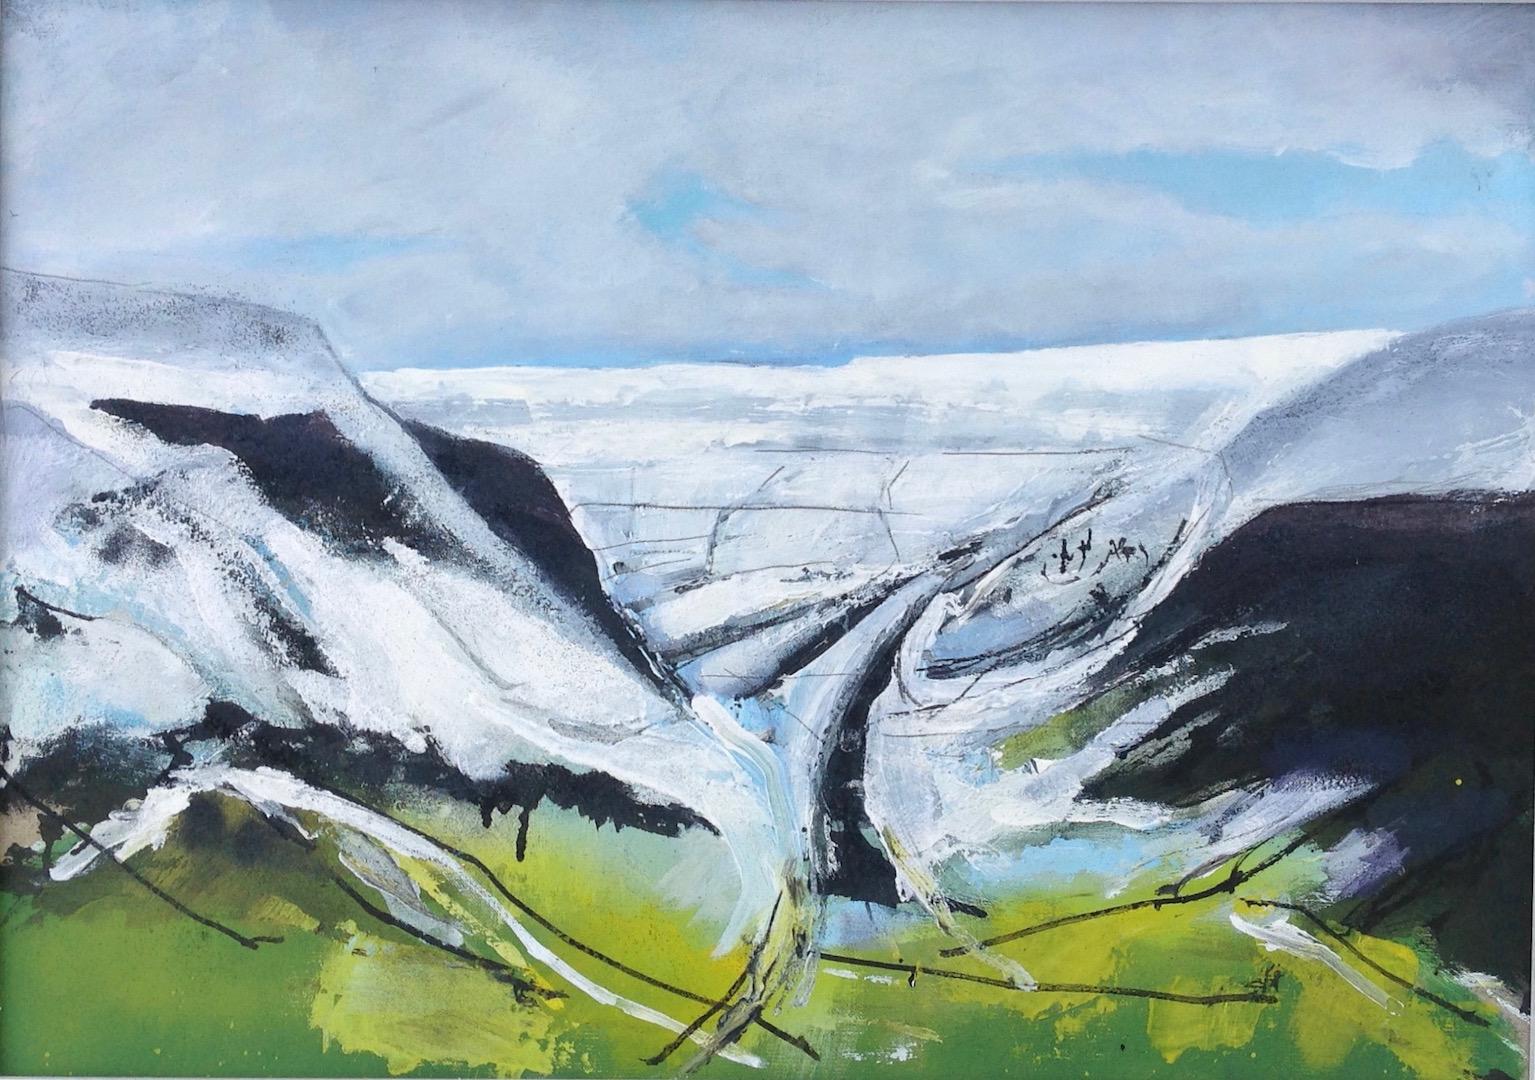 Maggie Laporte Banks.
Hay Bluff and the Black Mountains.
Acrylic, Indian ink and carborundum on a linen canvas.
Size: H 53cm x W 73 cm x D 6cm
Sold in a wooden white frame.
(Please note in situ images are purely an indication of how a piece may